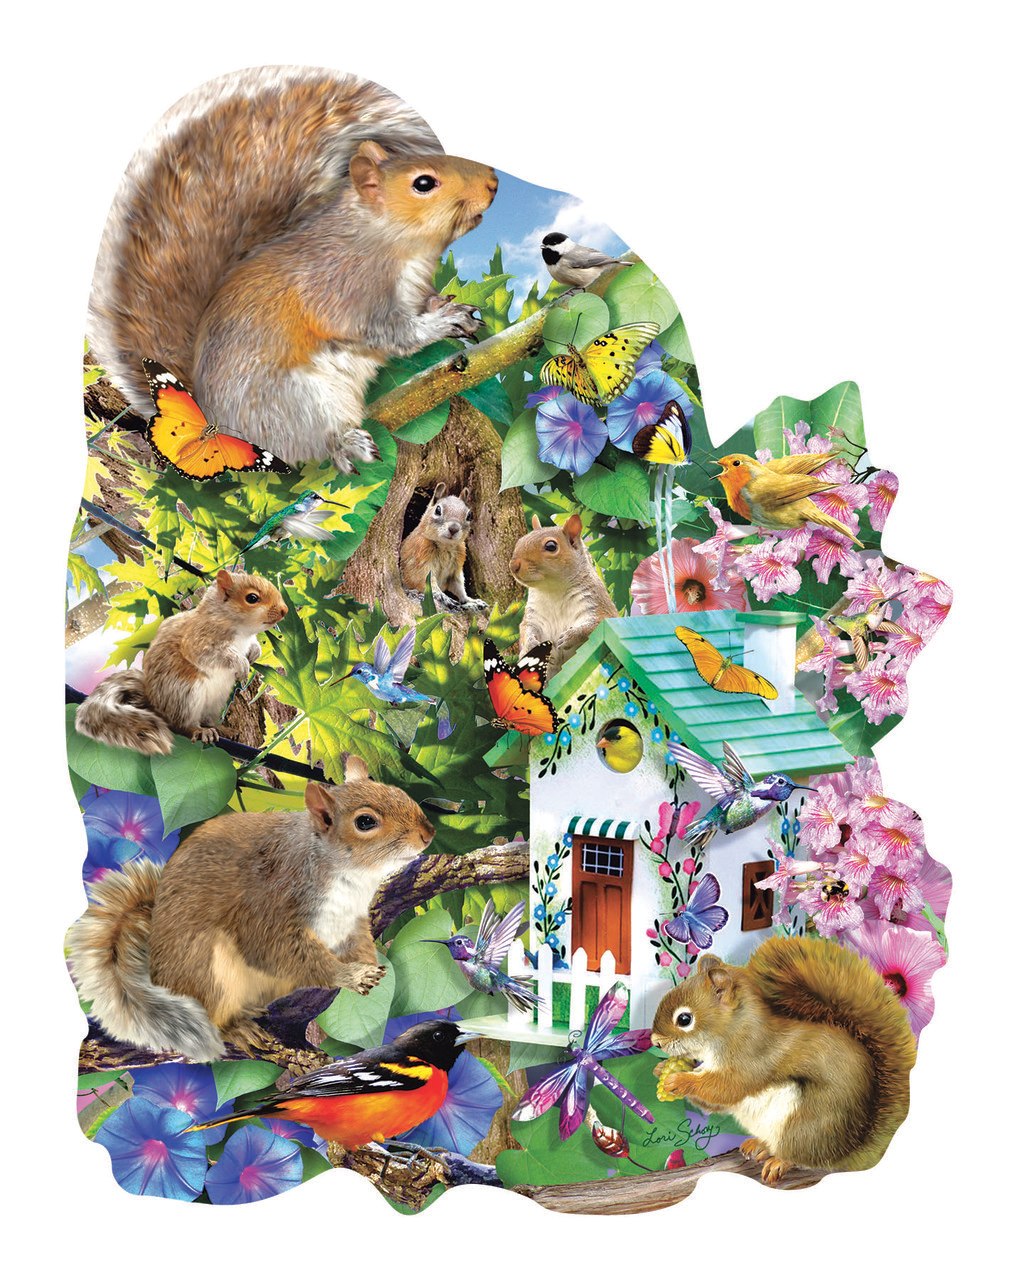 Something Squirrelly - 1000pc Shaped Jigsaw Puzzle By Sunsout  			  					NEW